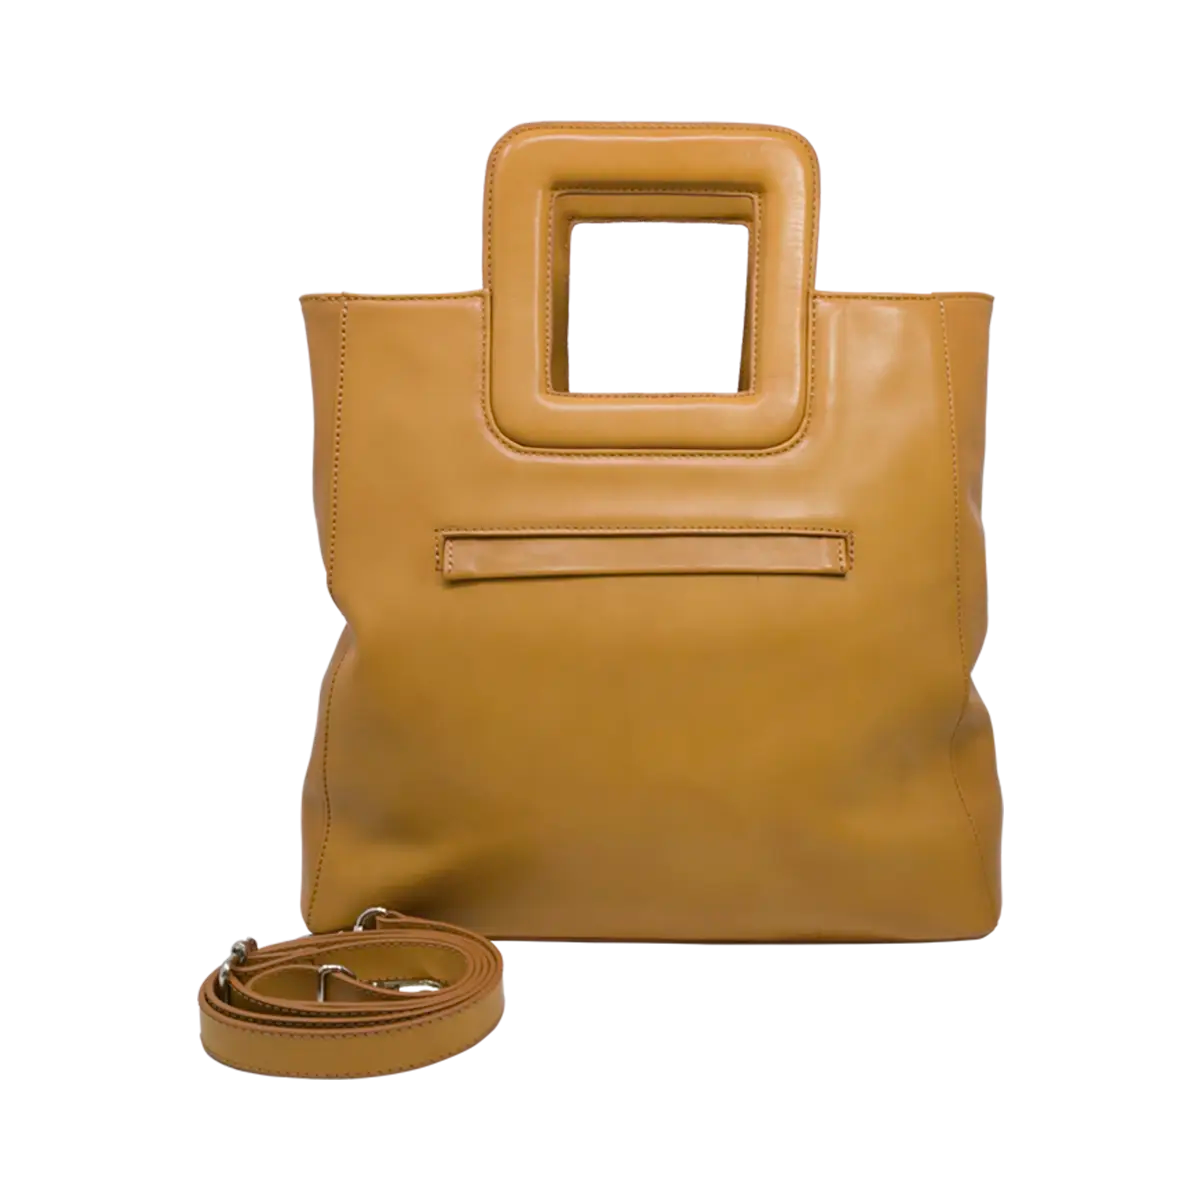 large tan circle leather print handbag with a square handle. Accessory for women in San Diego, CA.